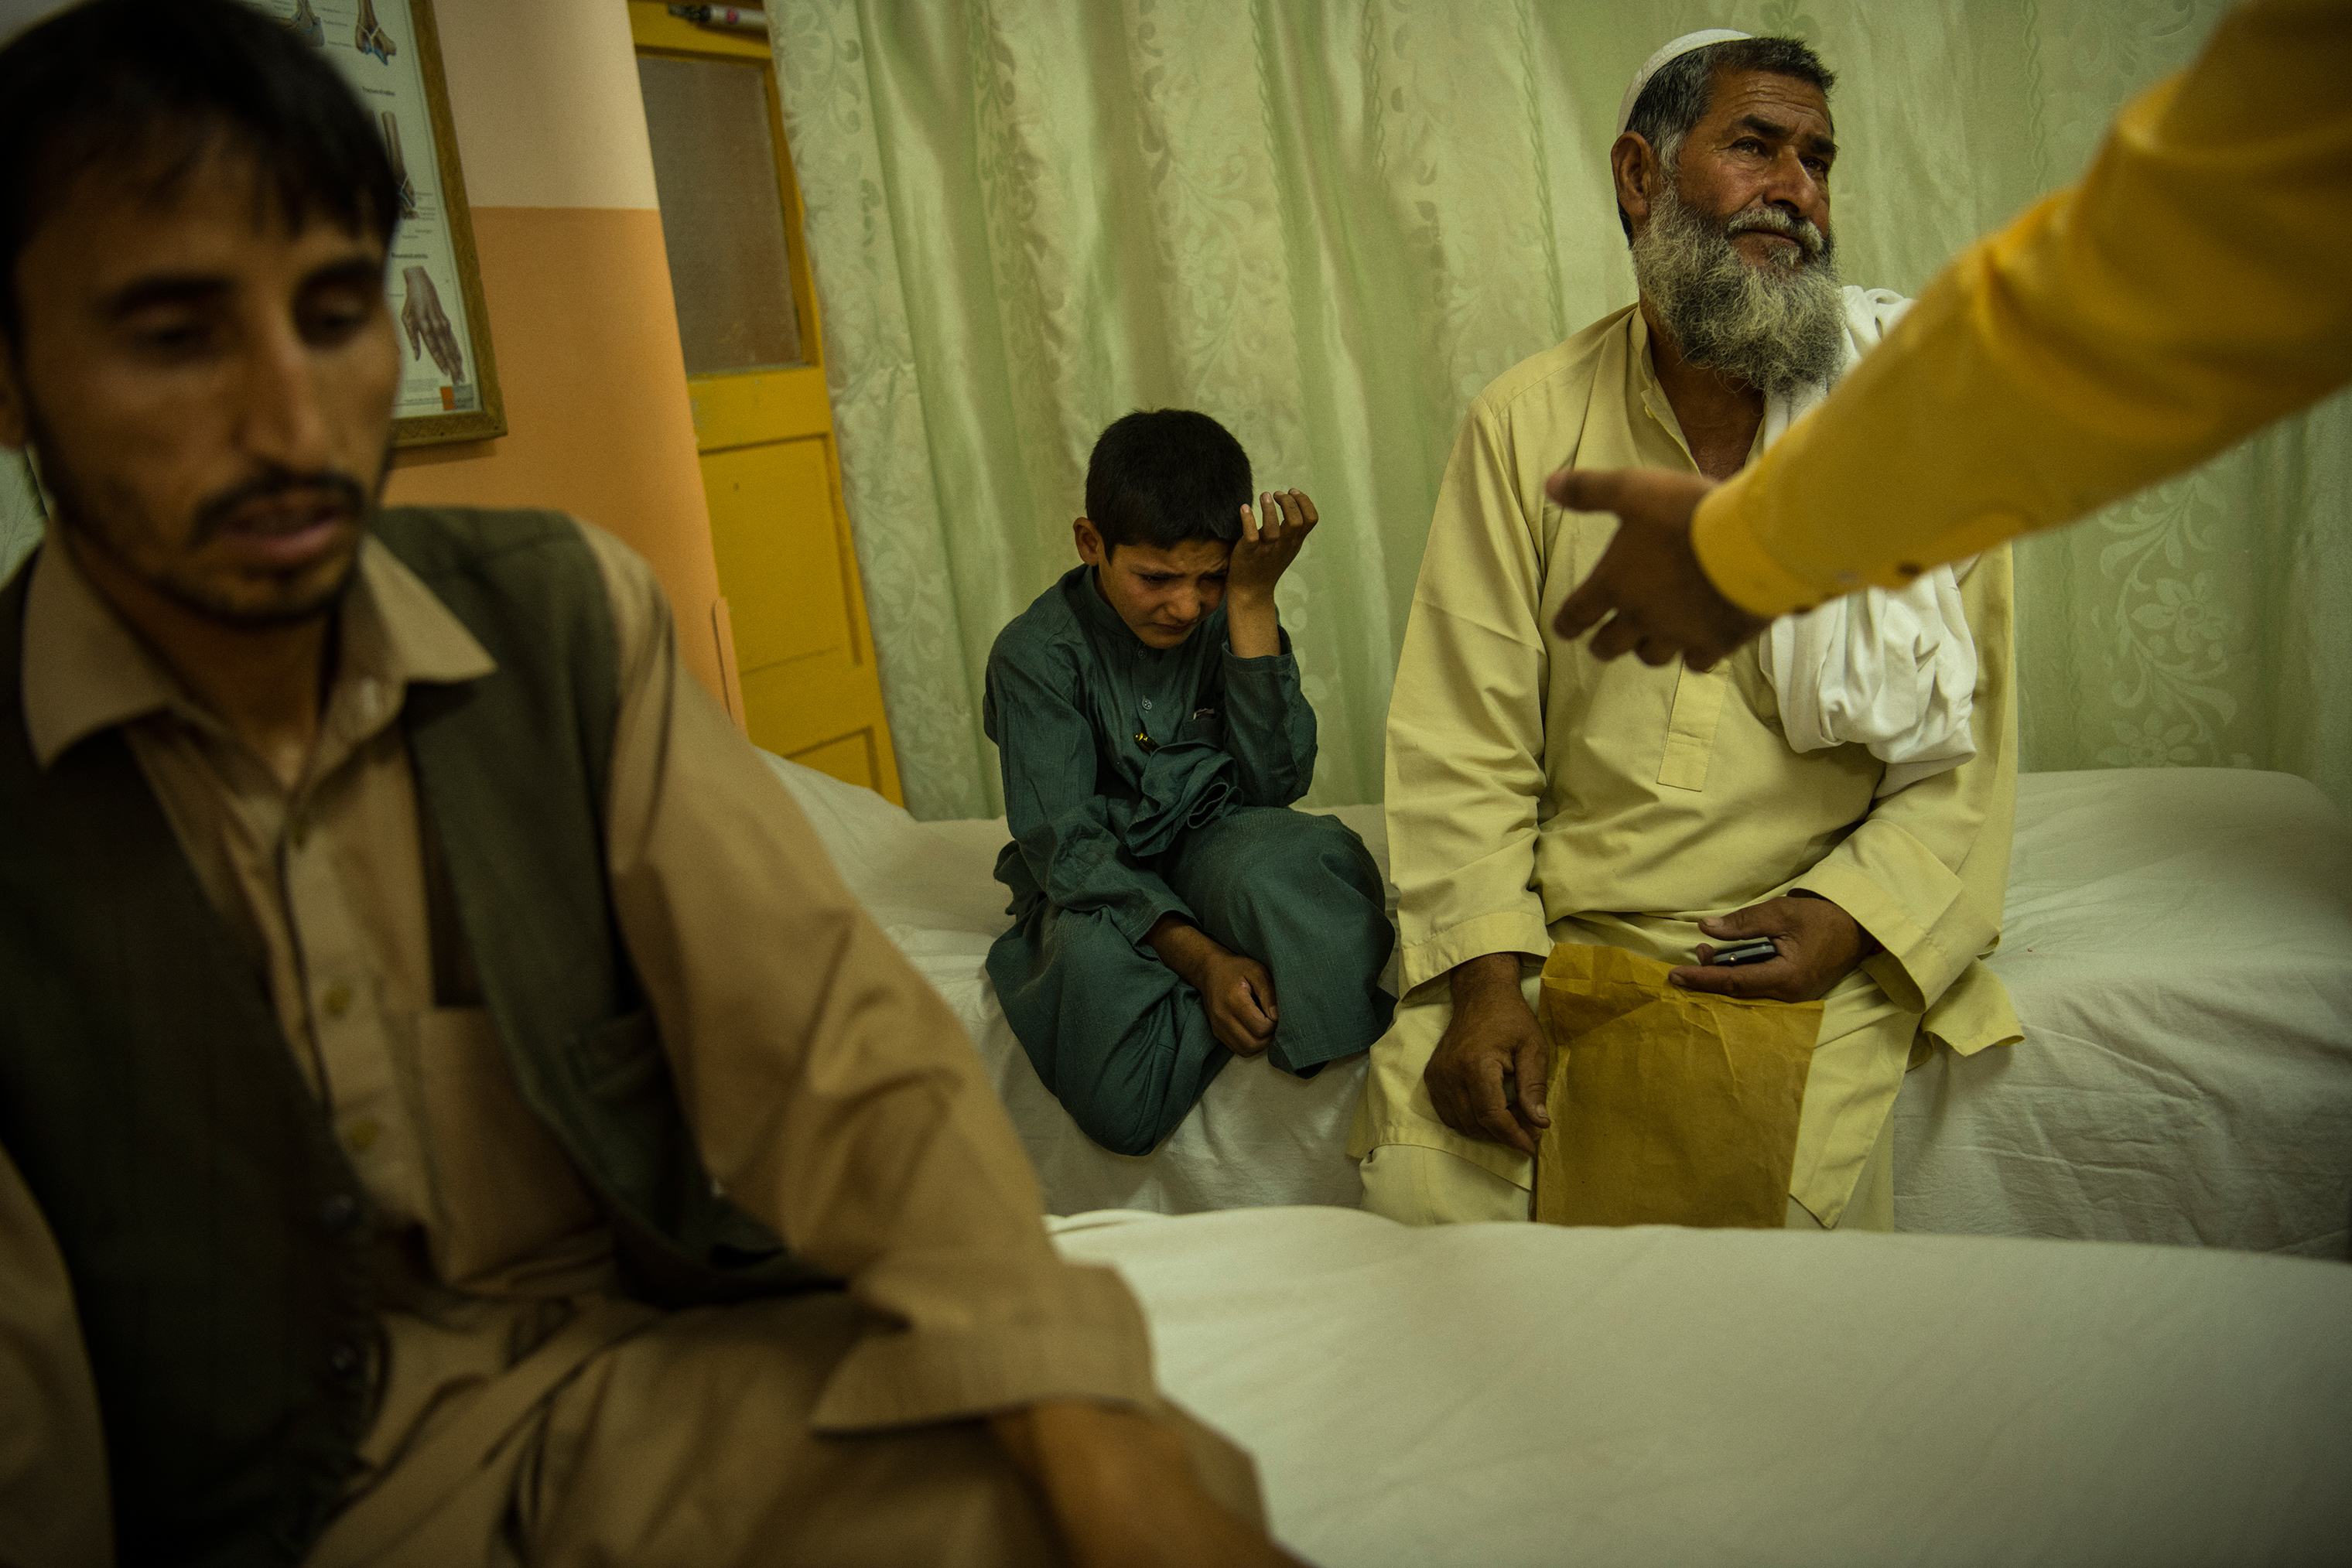 Abdul Rashid was assessed for surgery in late June after staffers at the orthopedic center performed an X-ray on his femurs and discovered that a severe fracture was far from healed. (Andrew Quilty for TIME)